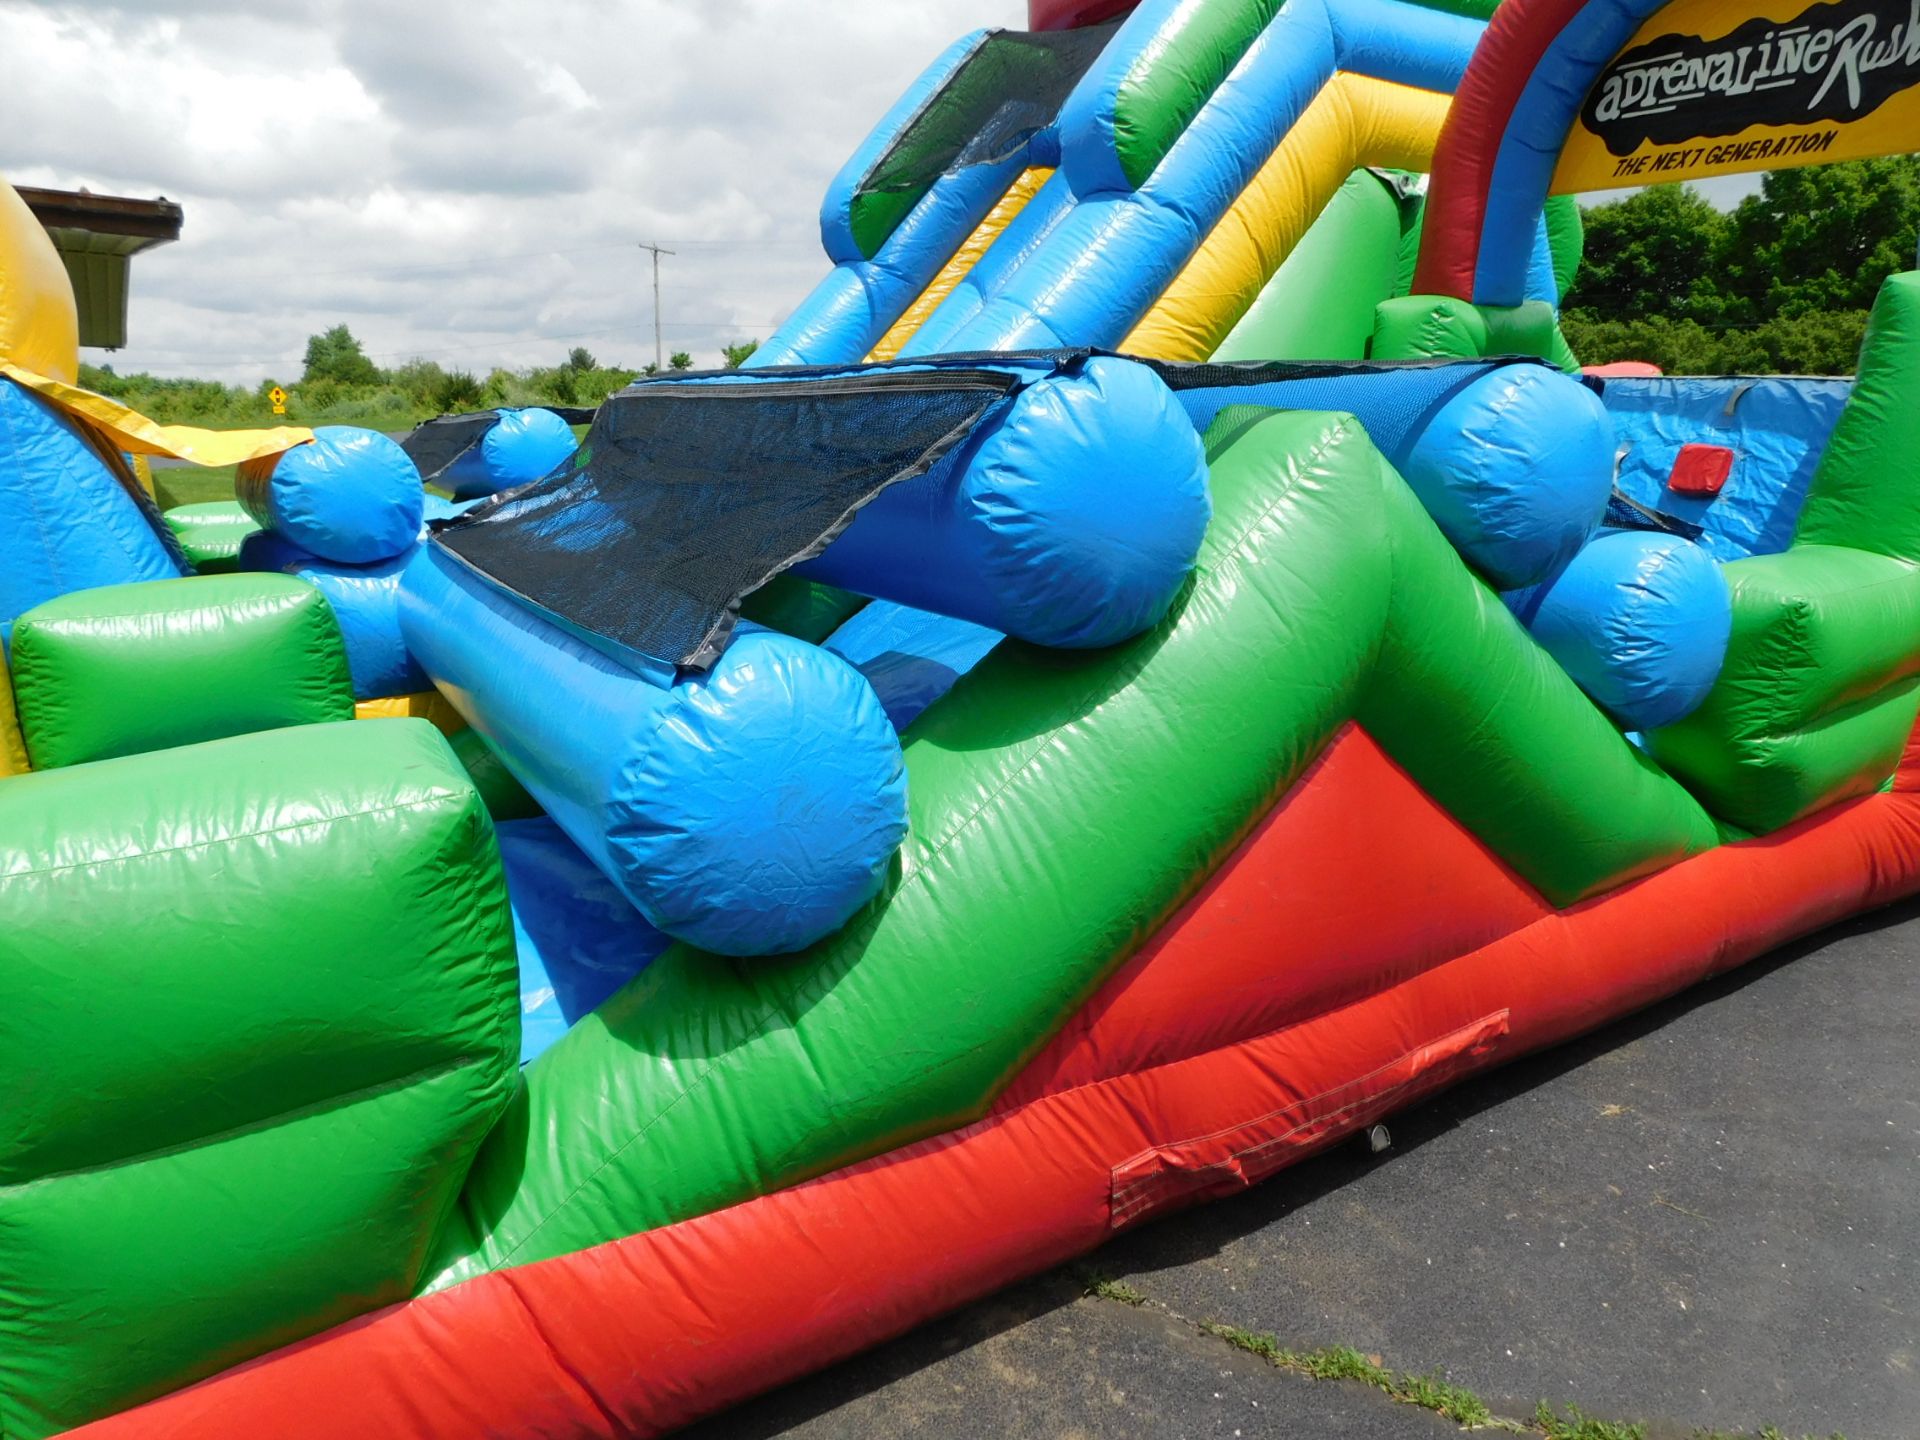 Inflatable Store "Adrenaline Rush" The Next Generation 3 piece Inflatable Obstacle Course, 24'WX34' - Image 12 of 28